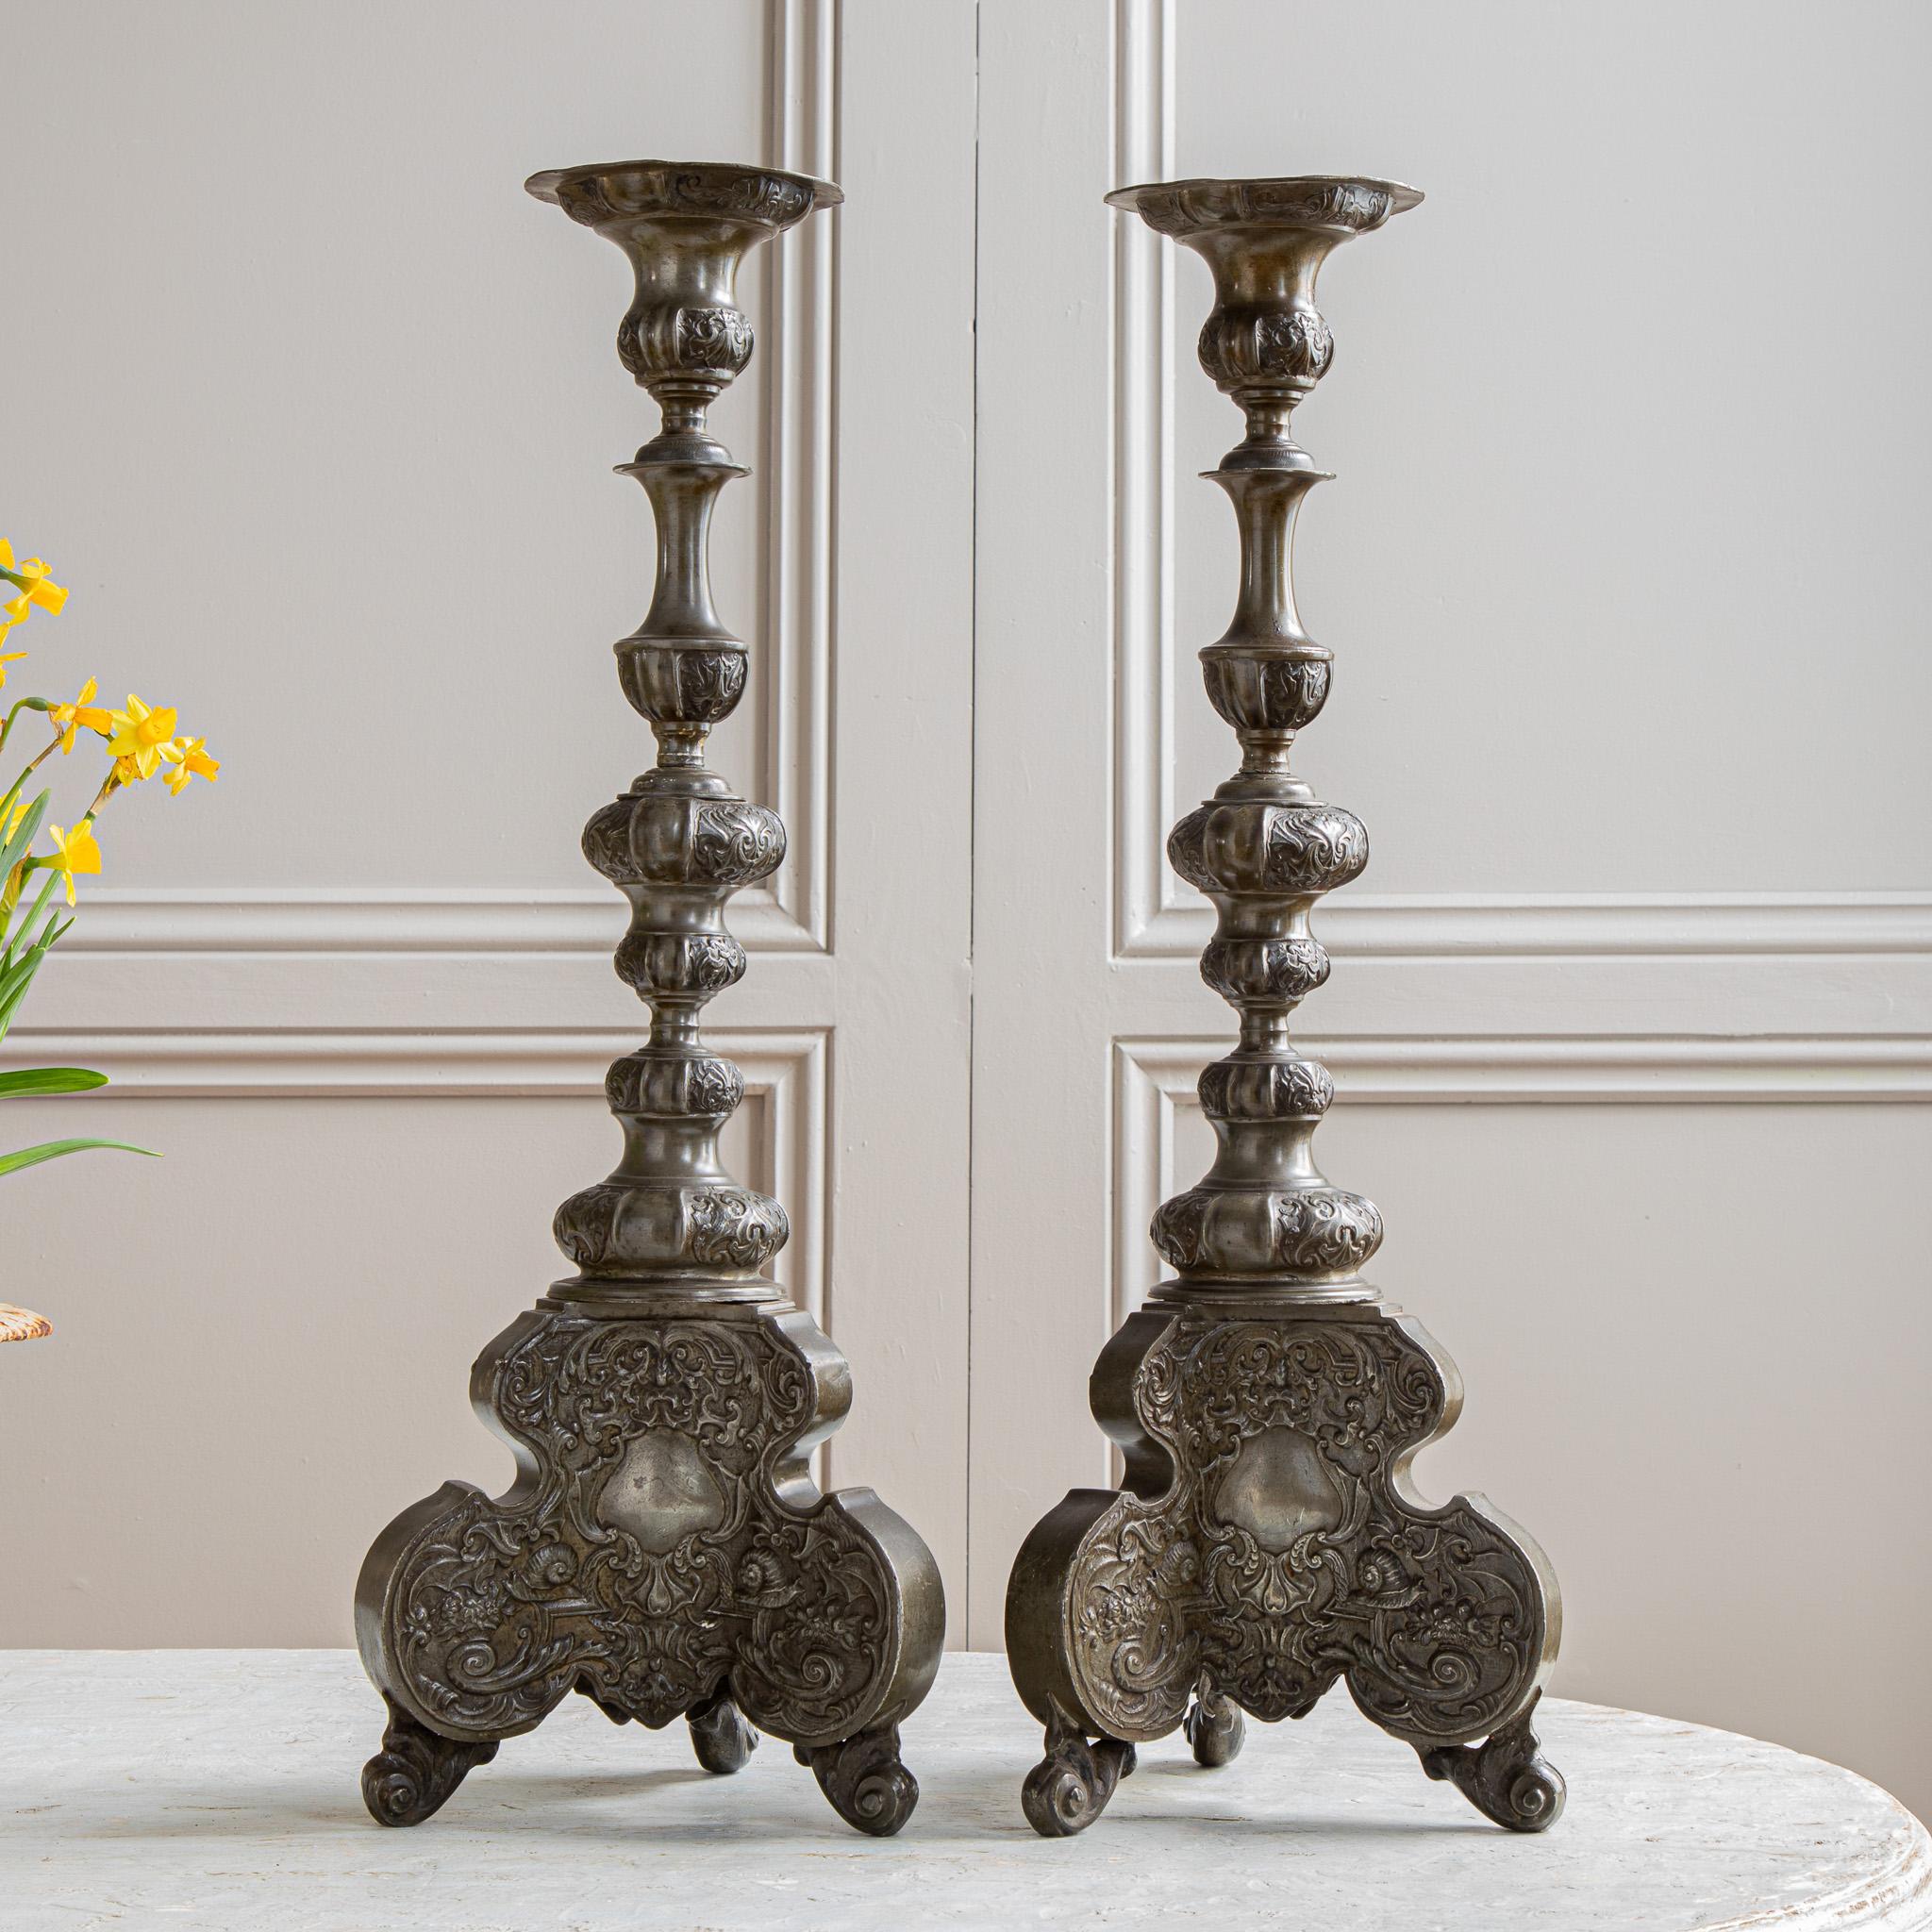 British 19th Century Renaissance Style Pewter Candle Holders From Towie Barclay Castle For Sale